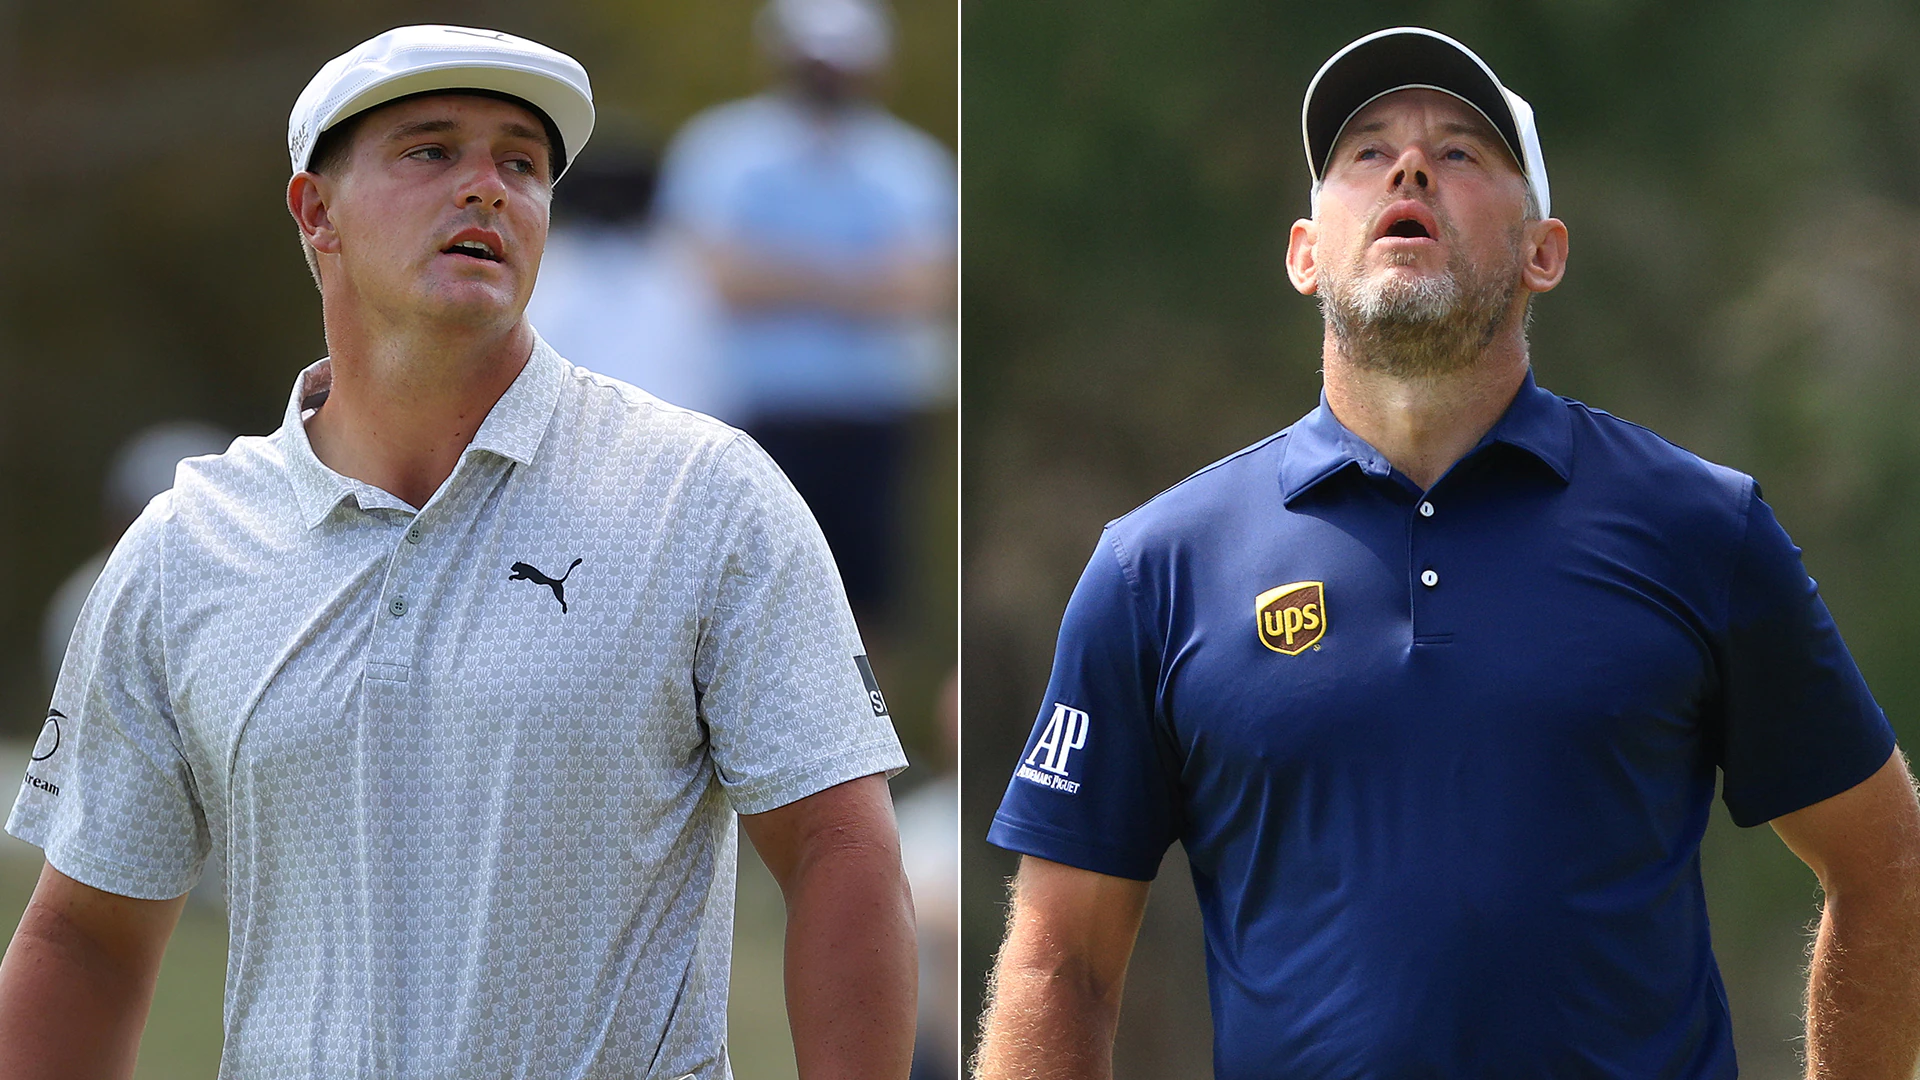 Top, slice, shank: The fourth-hole adventures of Bryson DeChambeau and Lee Westwood